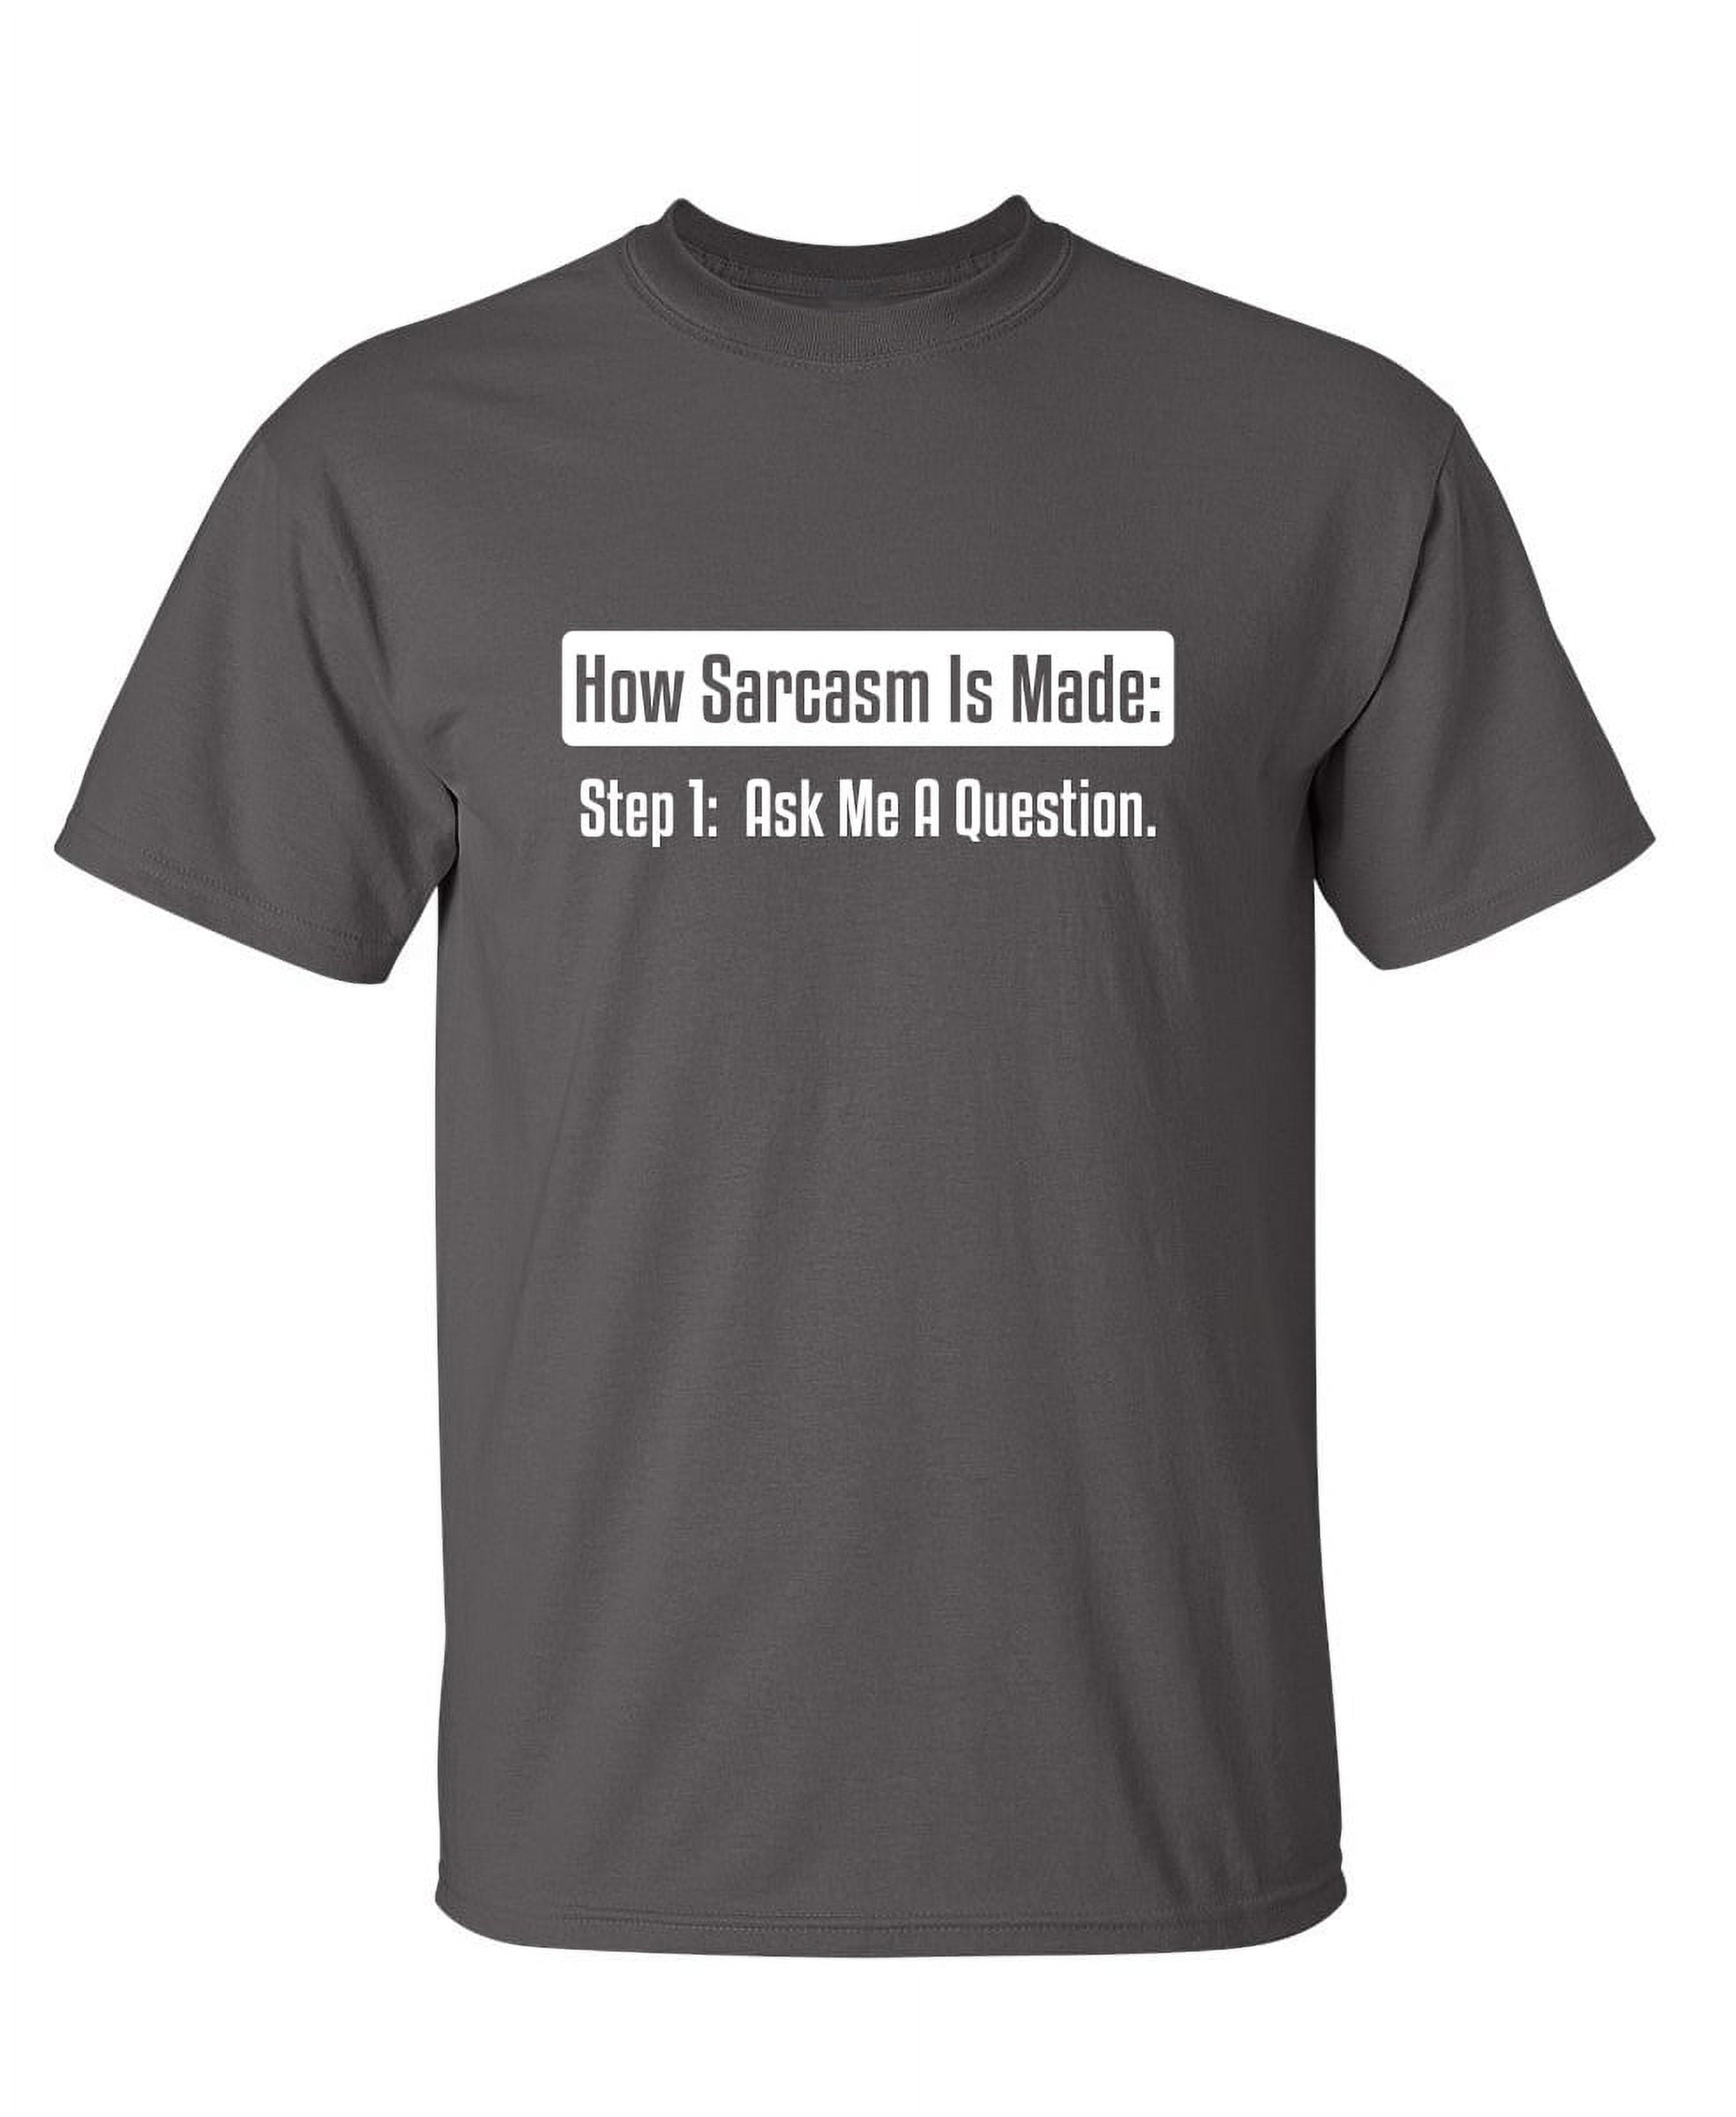 Ask Me About My Ninja Disguise Funny Tall T-Shirt